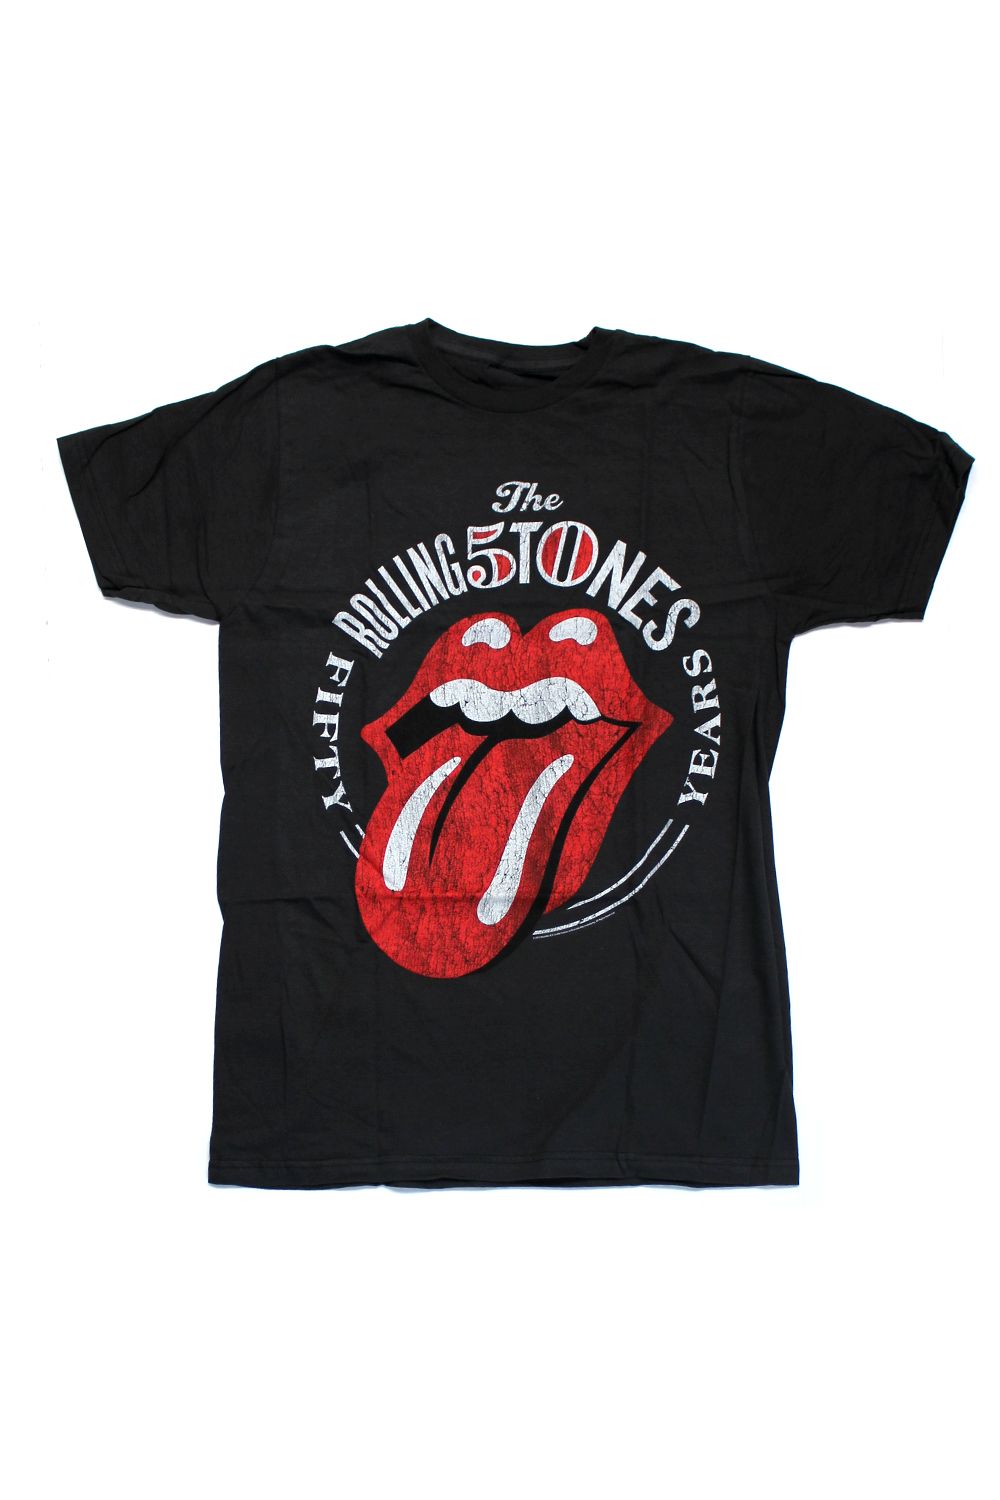 The Rolling Stones — The Rolling Stones Official Merchandise — Band T ...